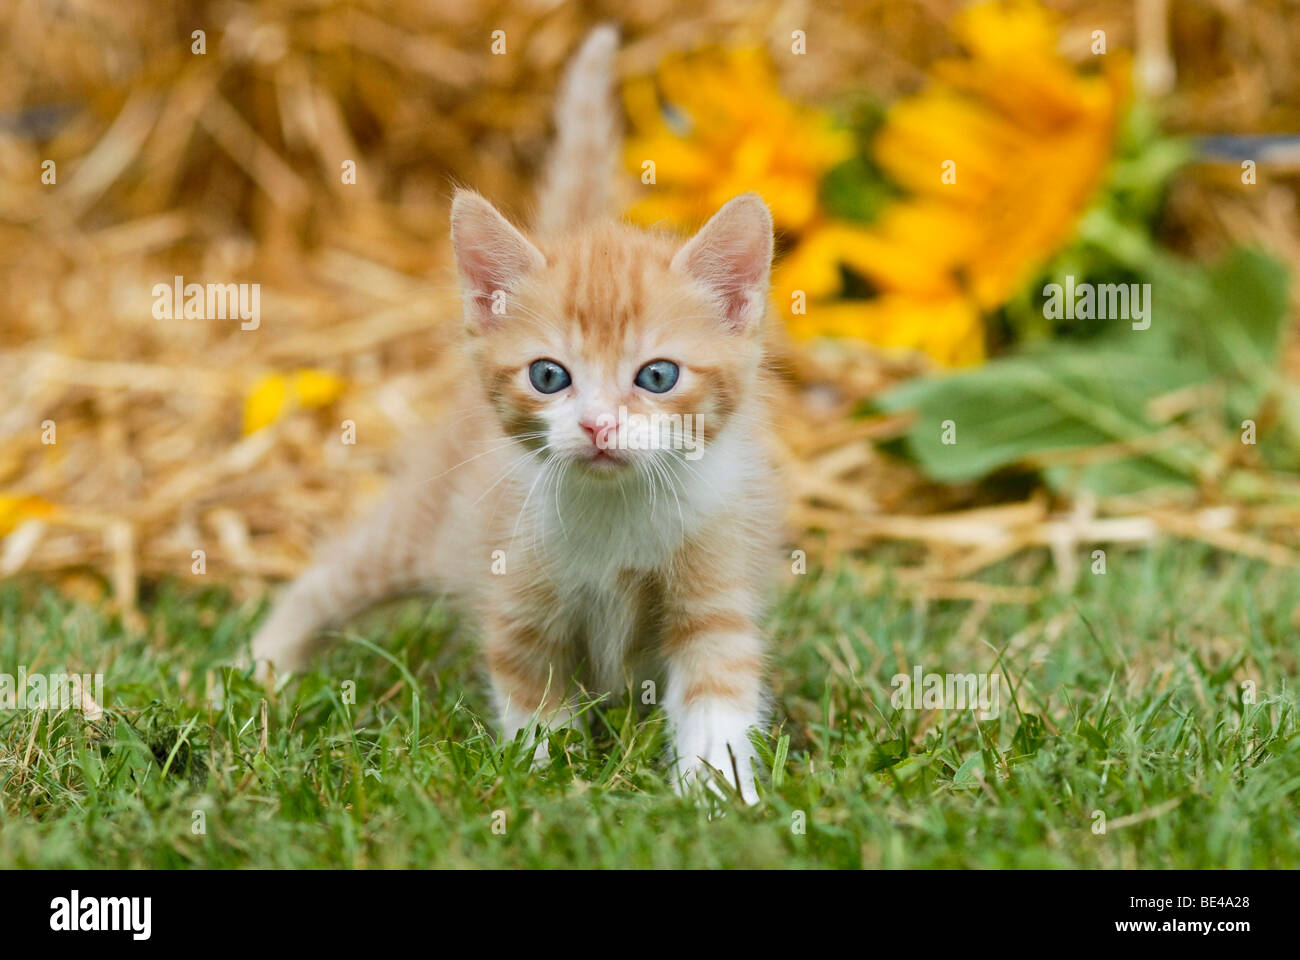 Domestic cat, kitten running over a meadow Stock Photo